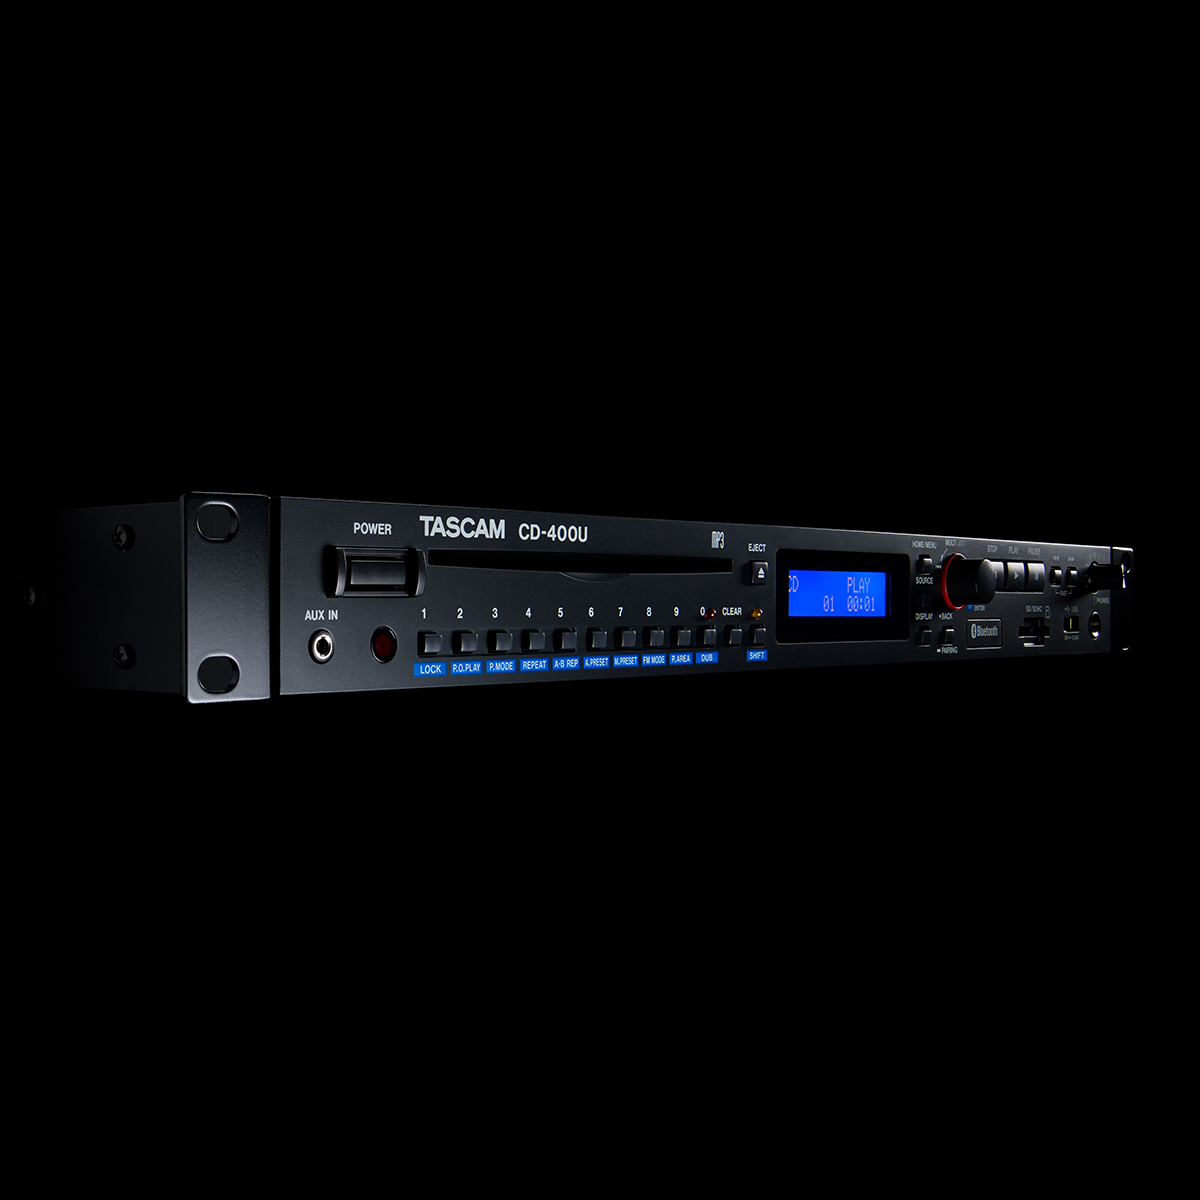 CD-400U - New Upgraded Version 1.54 of Firmware Released